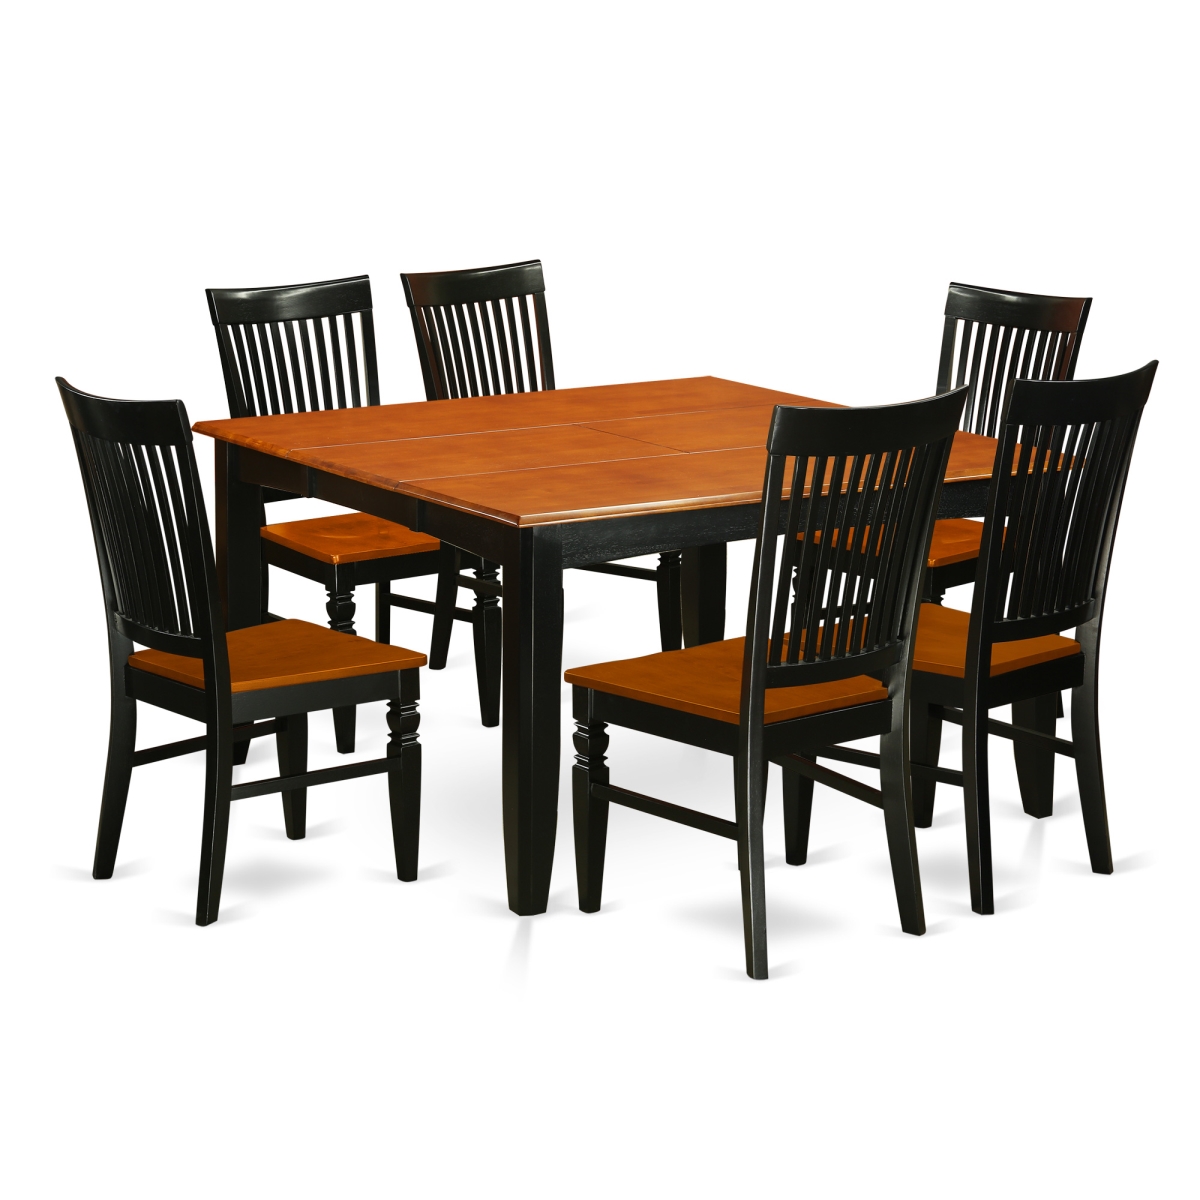 PFWE7-BCH-W Kitchen Table Set with a Dining Table & 6 Kitchen Chairs, 7 piece - Black & Cherry -  East West Furniture